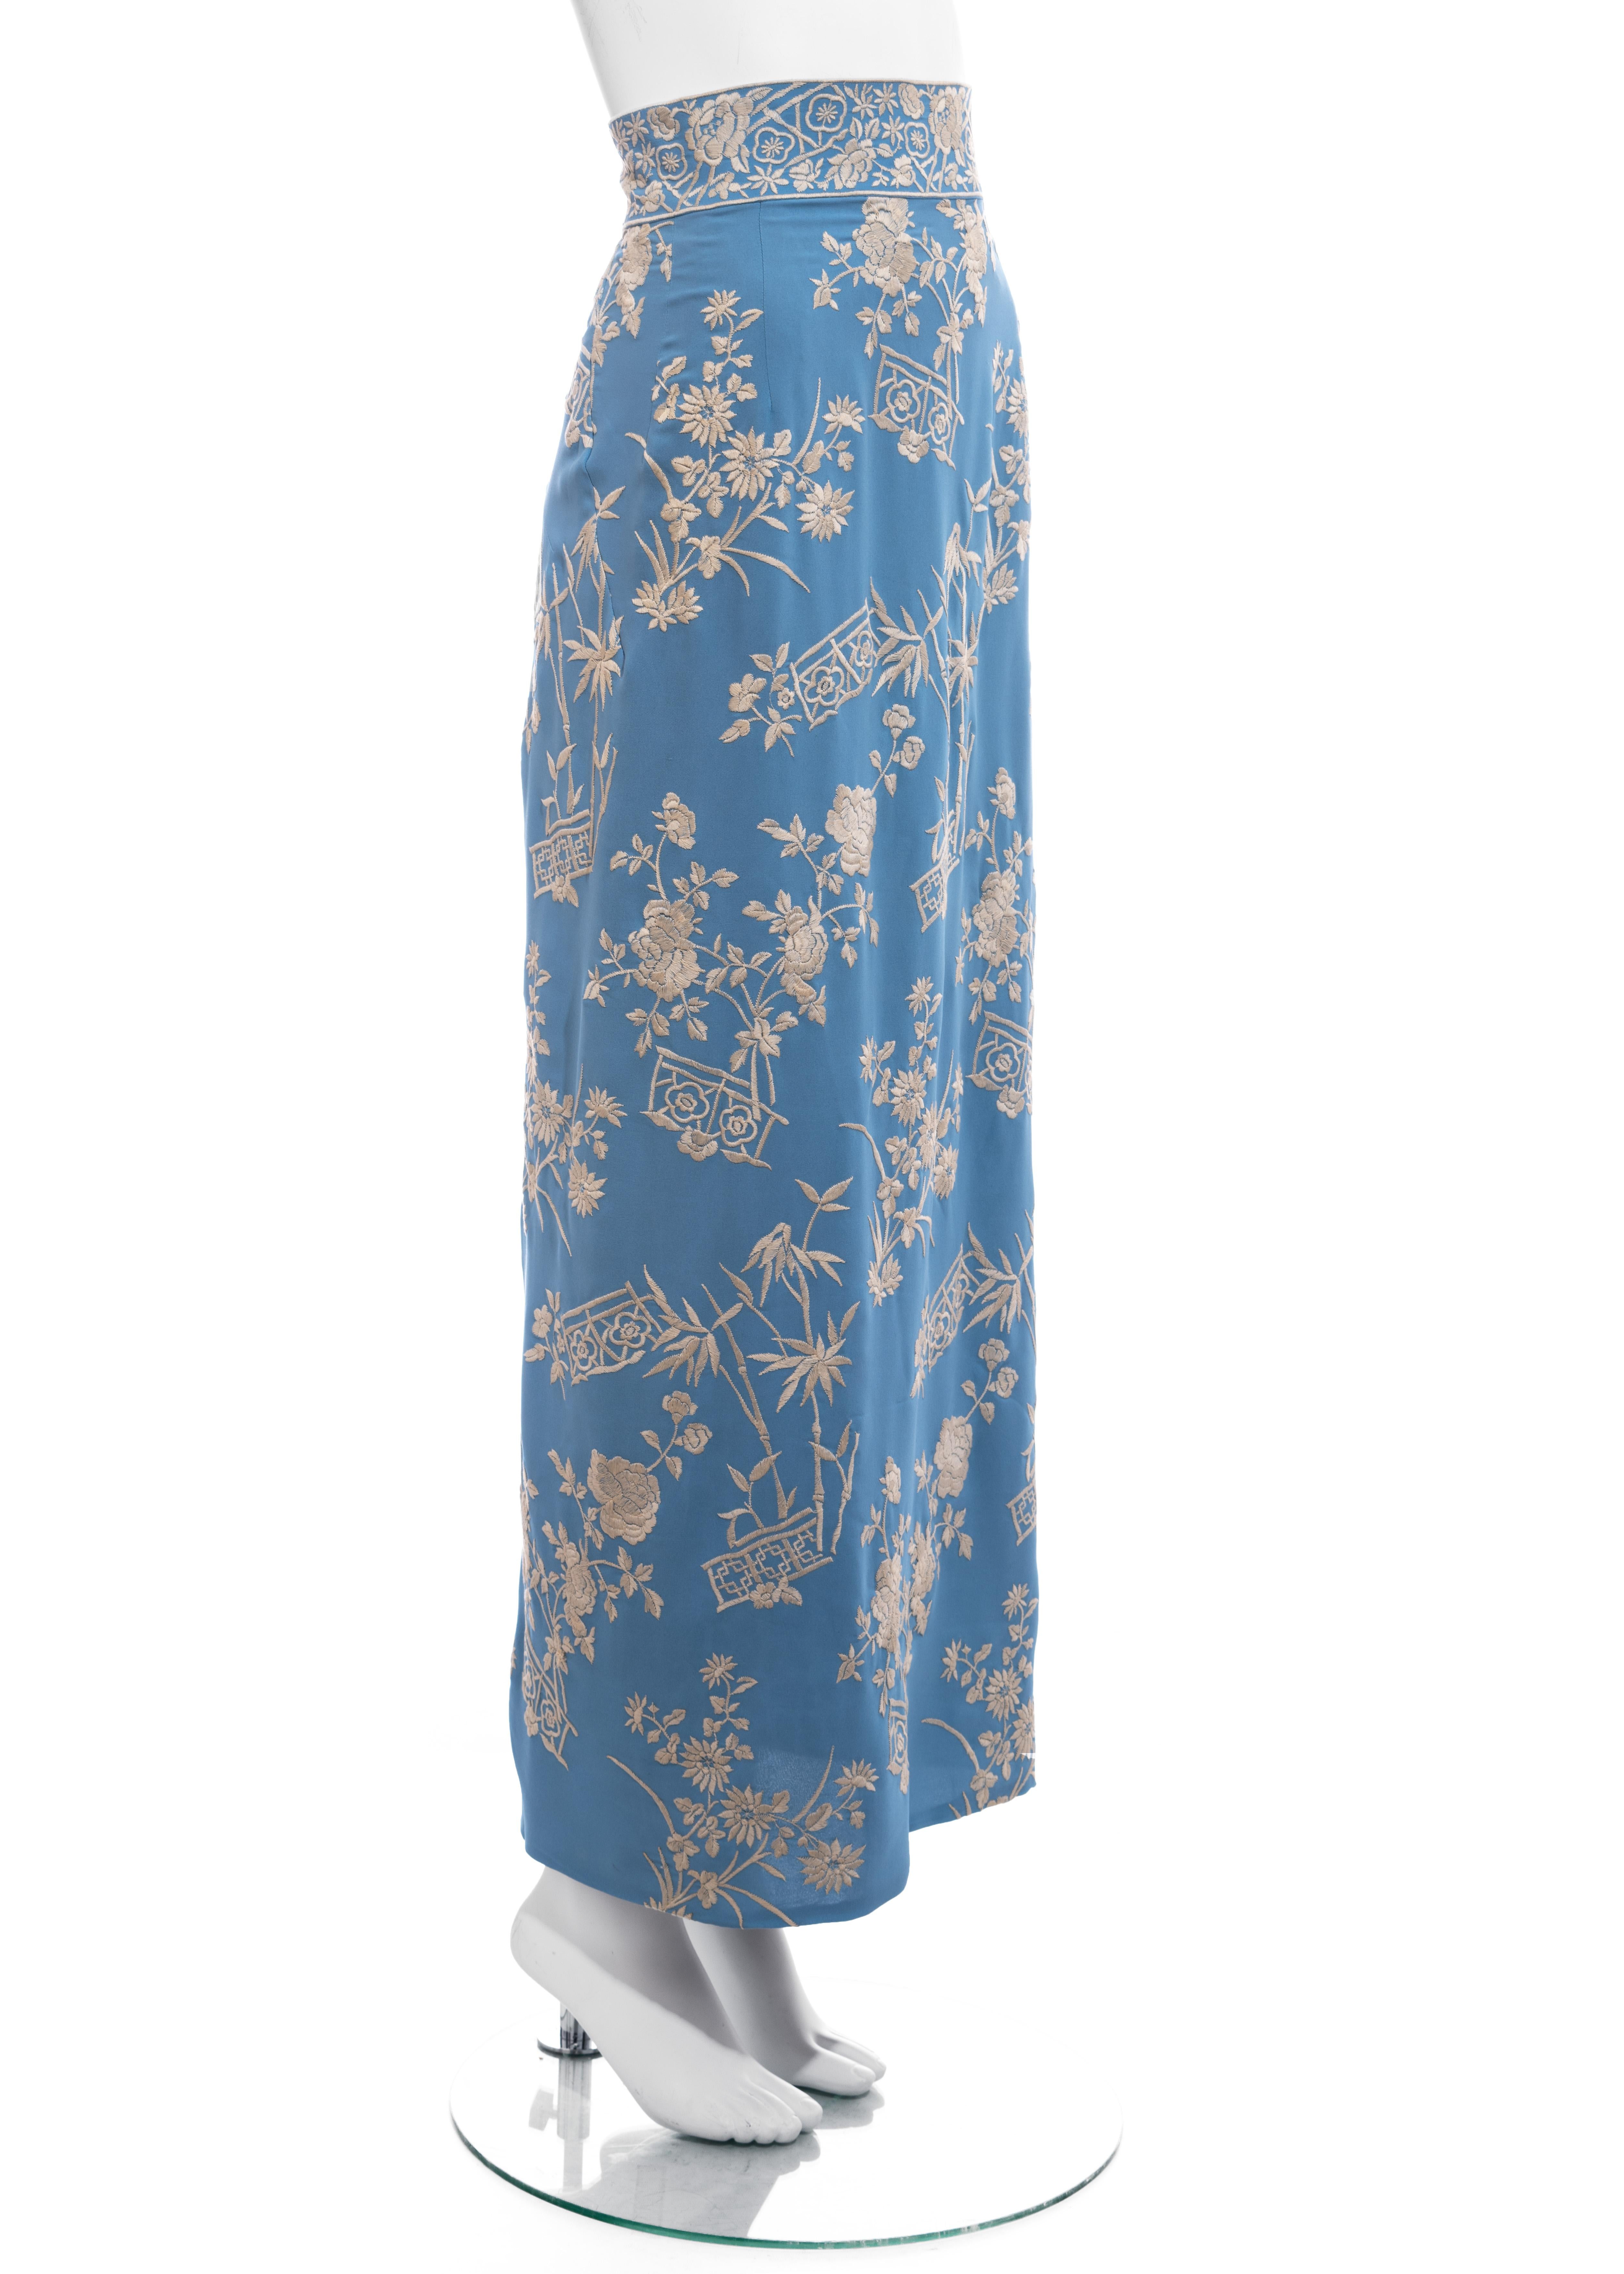 Dolce & Gabbana blue silk evening wrap skirt with floral embroidery, ss 1997 1